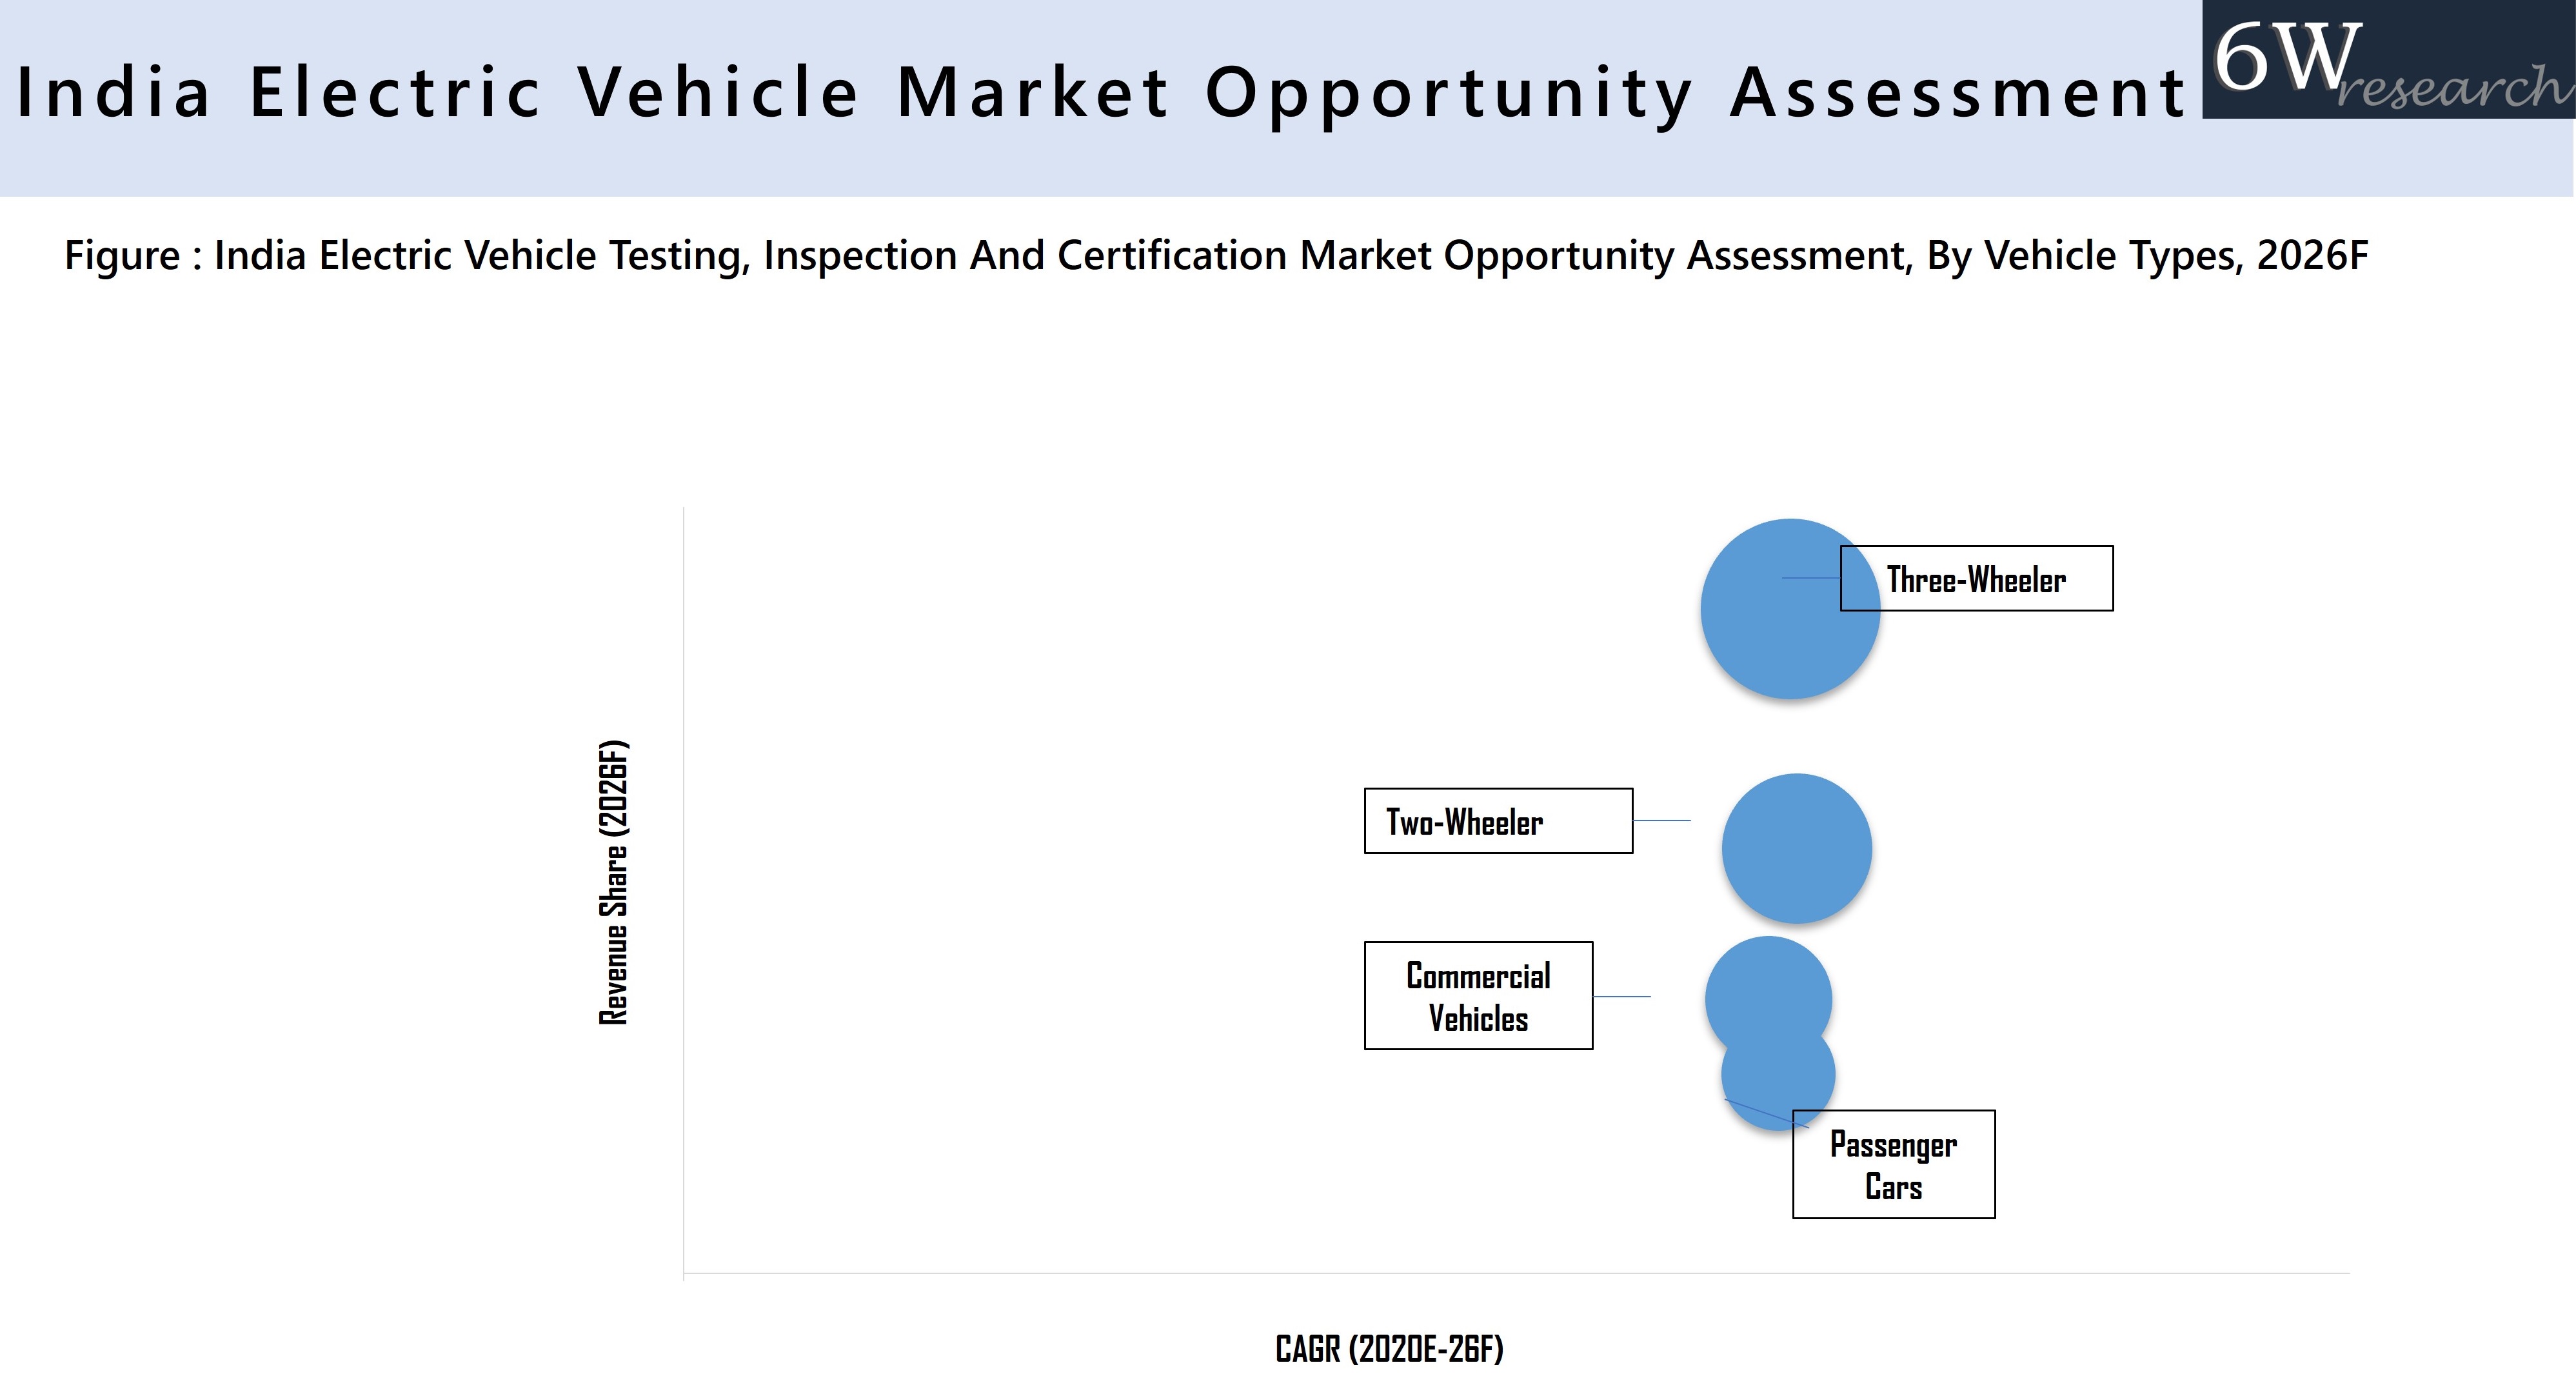 India Electric Vehicle Market Opportunity Assessment